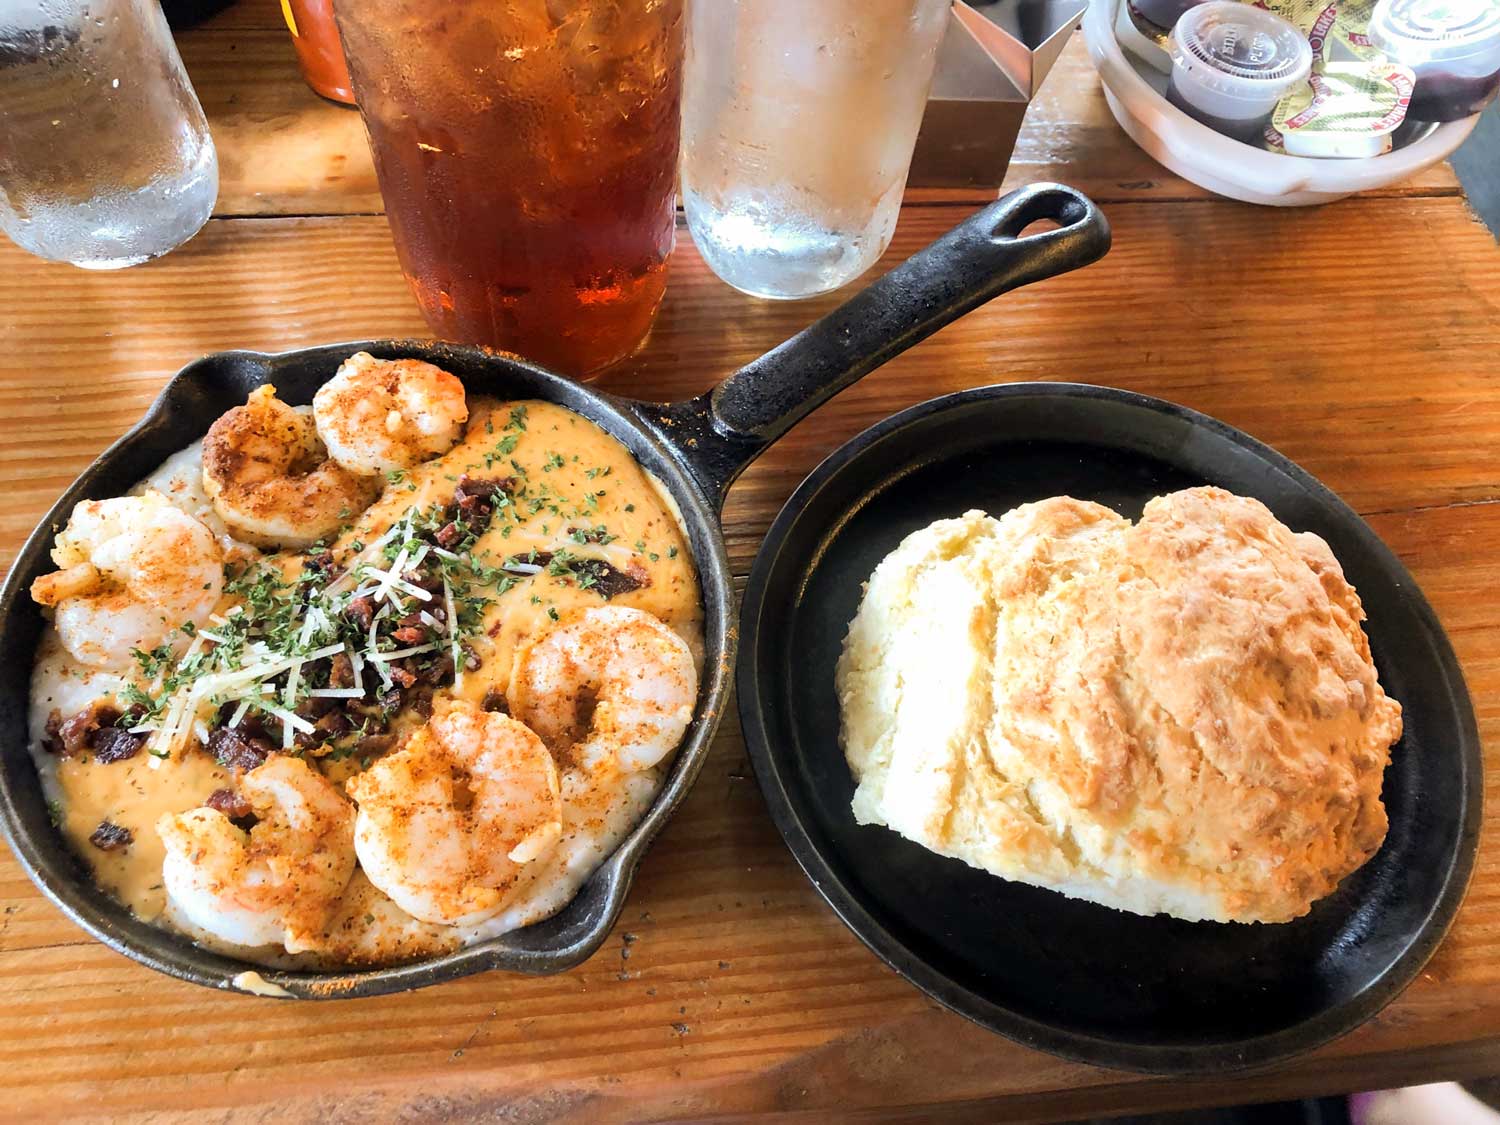 iron skillet with shrimp and grits and second iron skillet with large biscuit